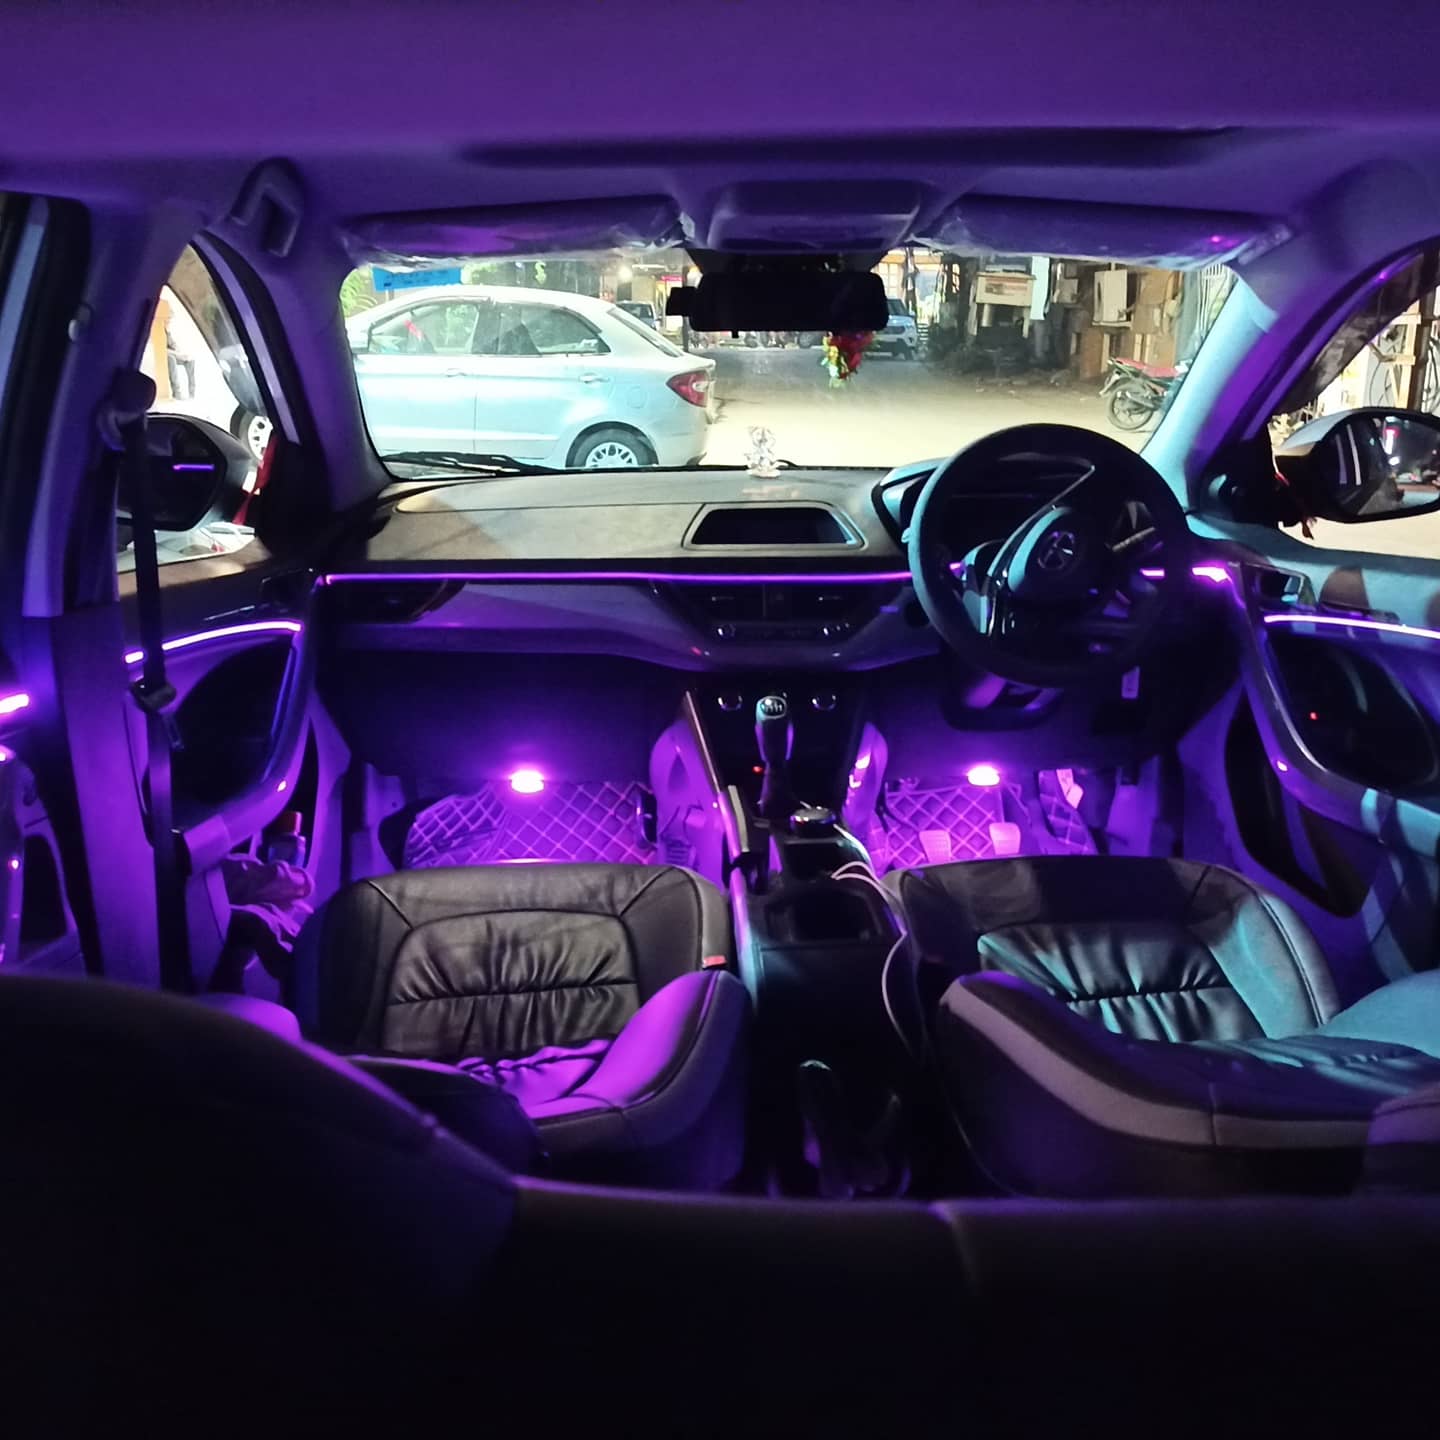 Star Car Decor & Accessories on X: Ambient lighting Interior Lighting Tata  Nexon Interior Lighting Star Car Decor BHOPAL In this video we have install Ambient  lighting #Tata #Nexon Atmosphere Light aftermarket #